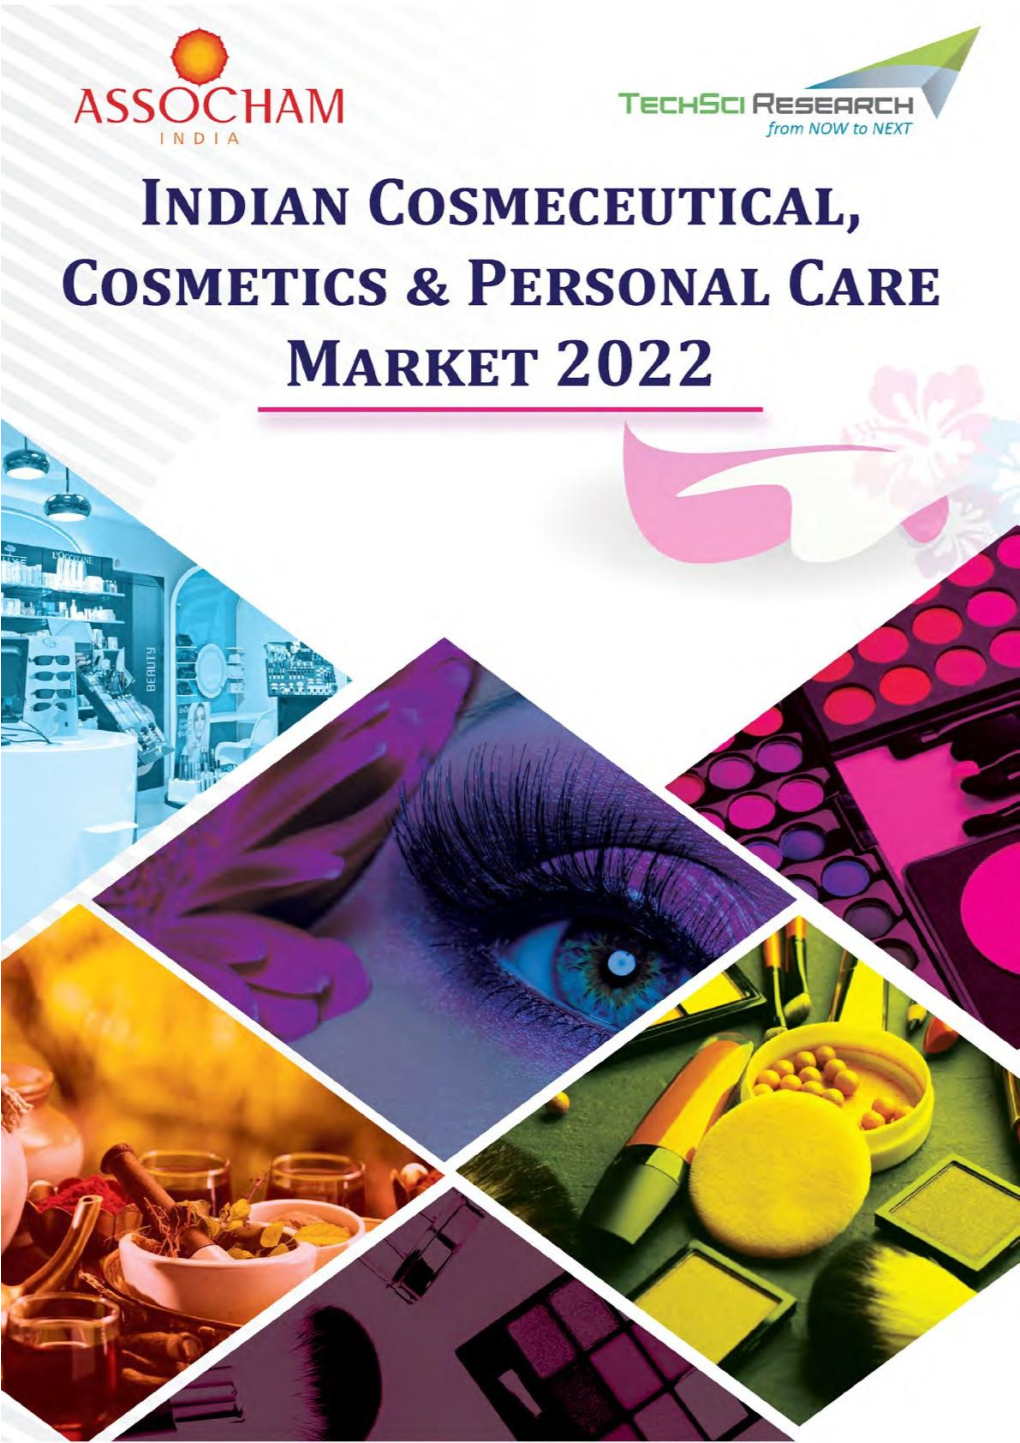 Indian Cosmeceutical, Cosmetics & Personal Care Market, 2022